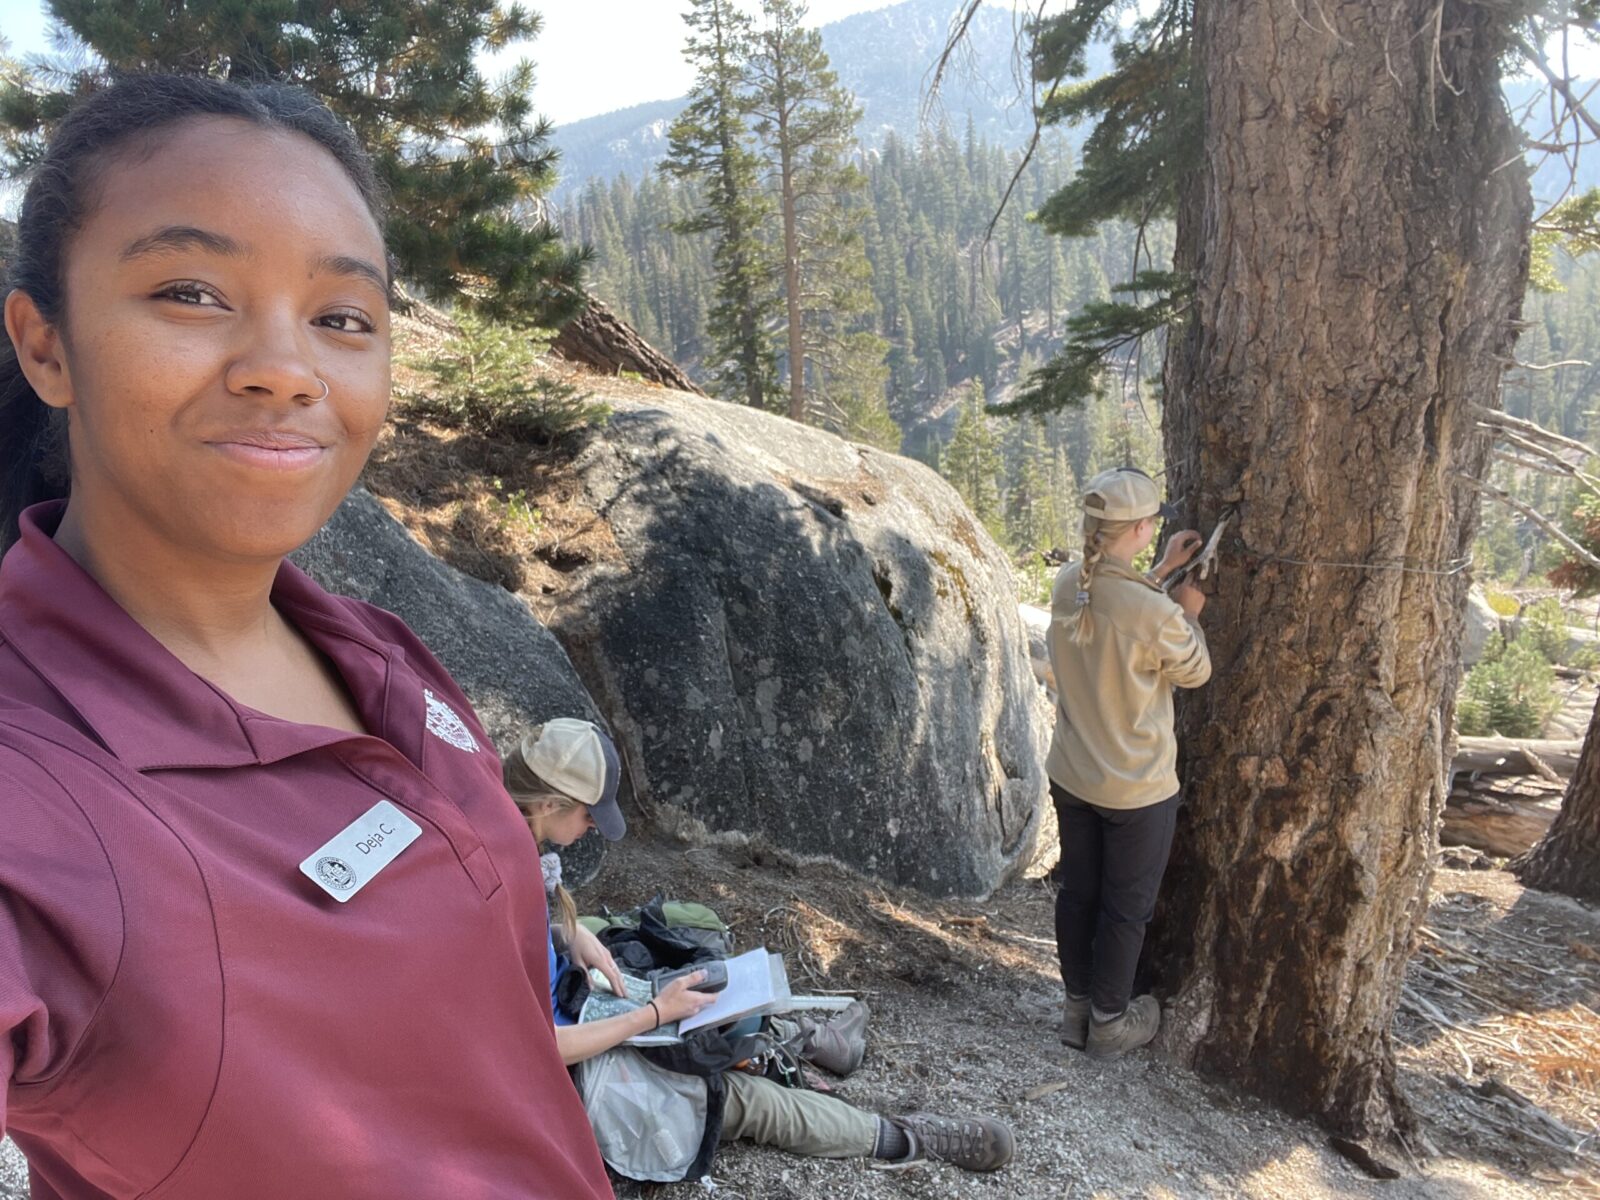 Deja with other interns during her NPS Academy internship at Devils Postpile National Monument.